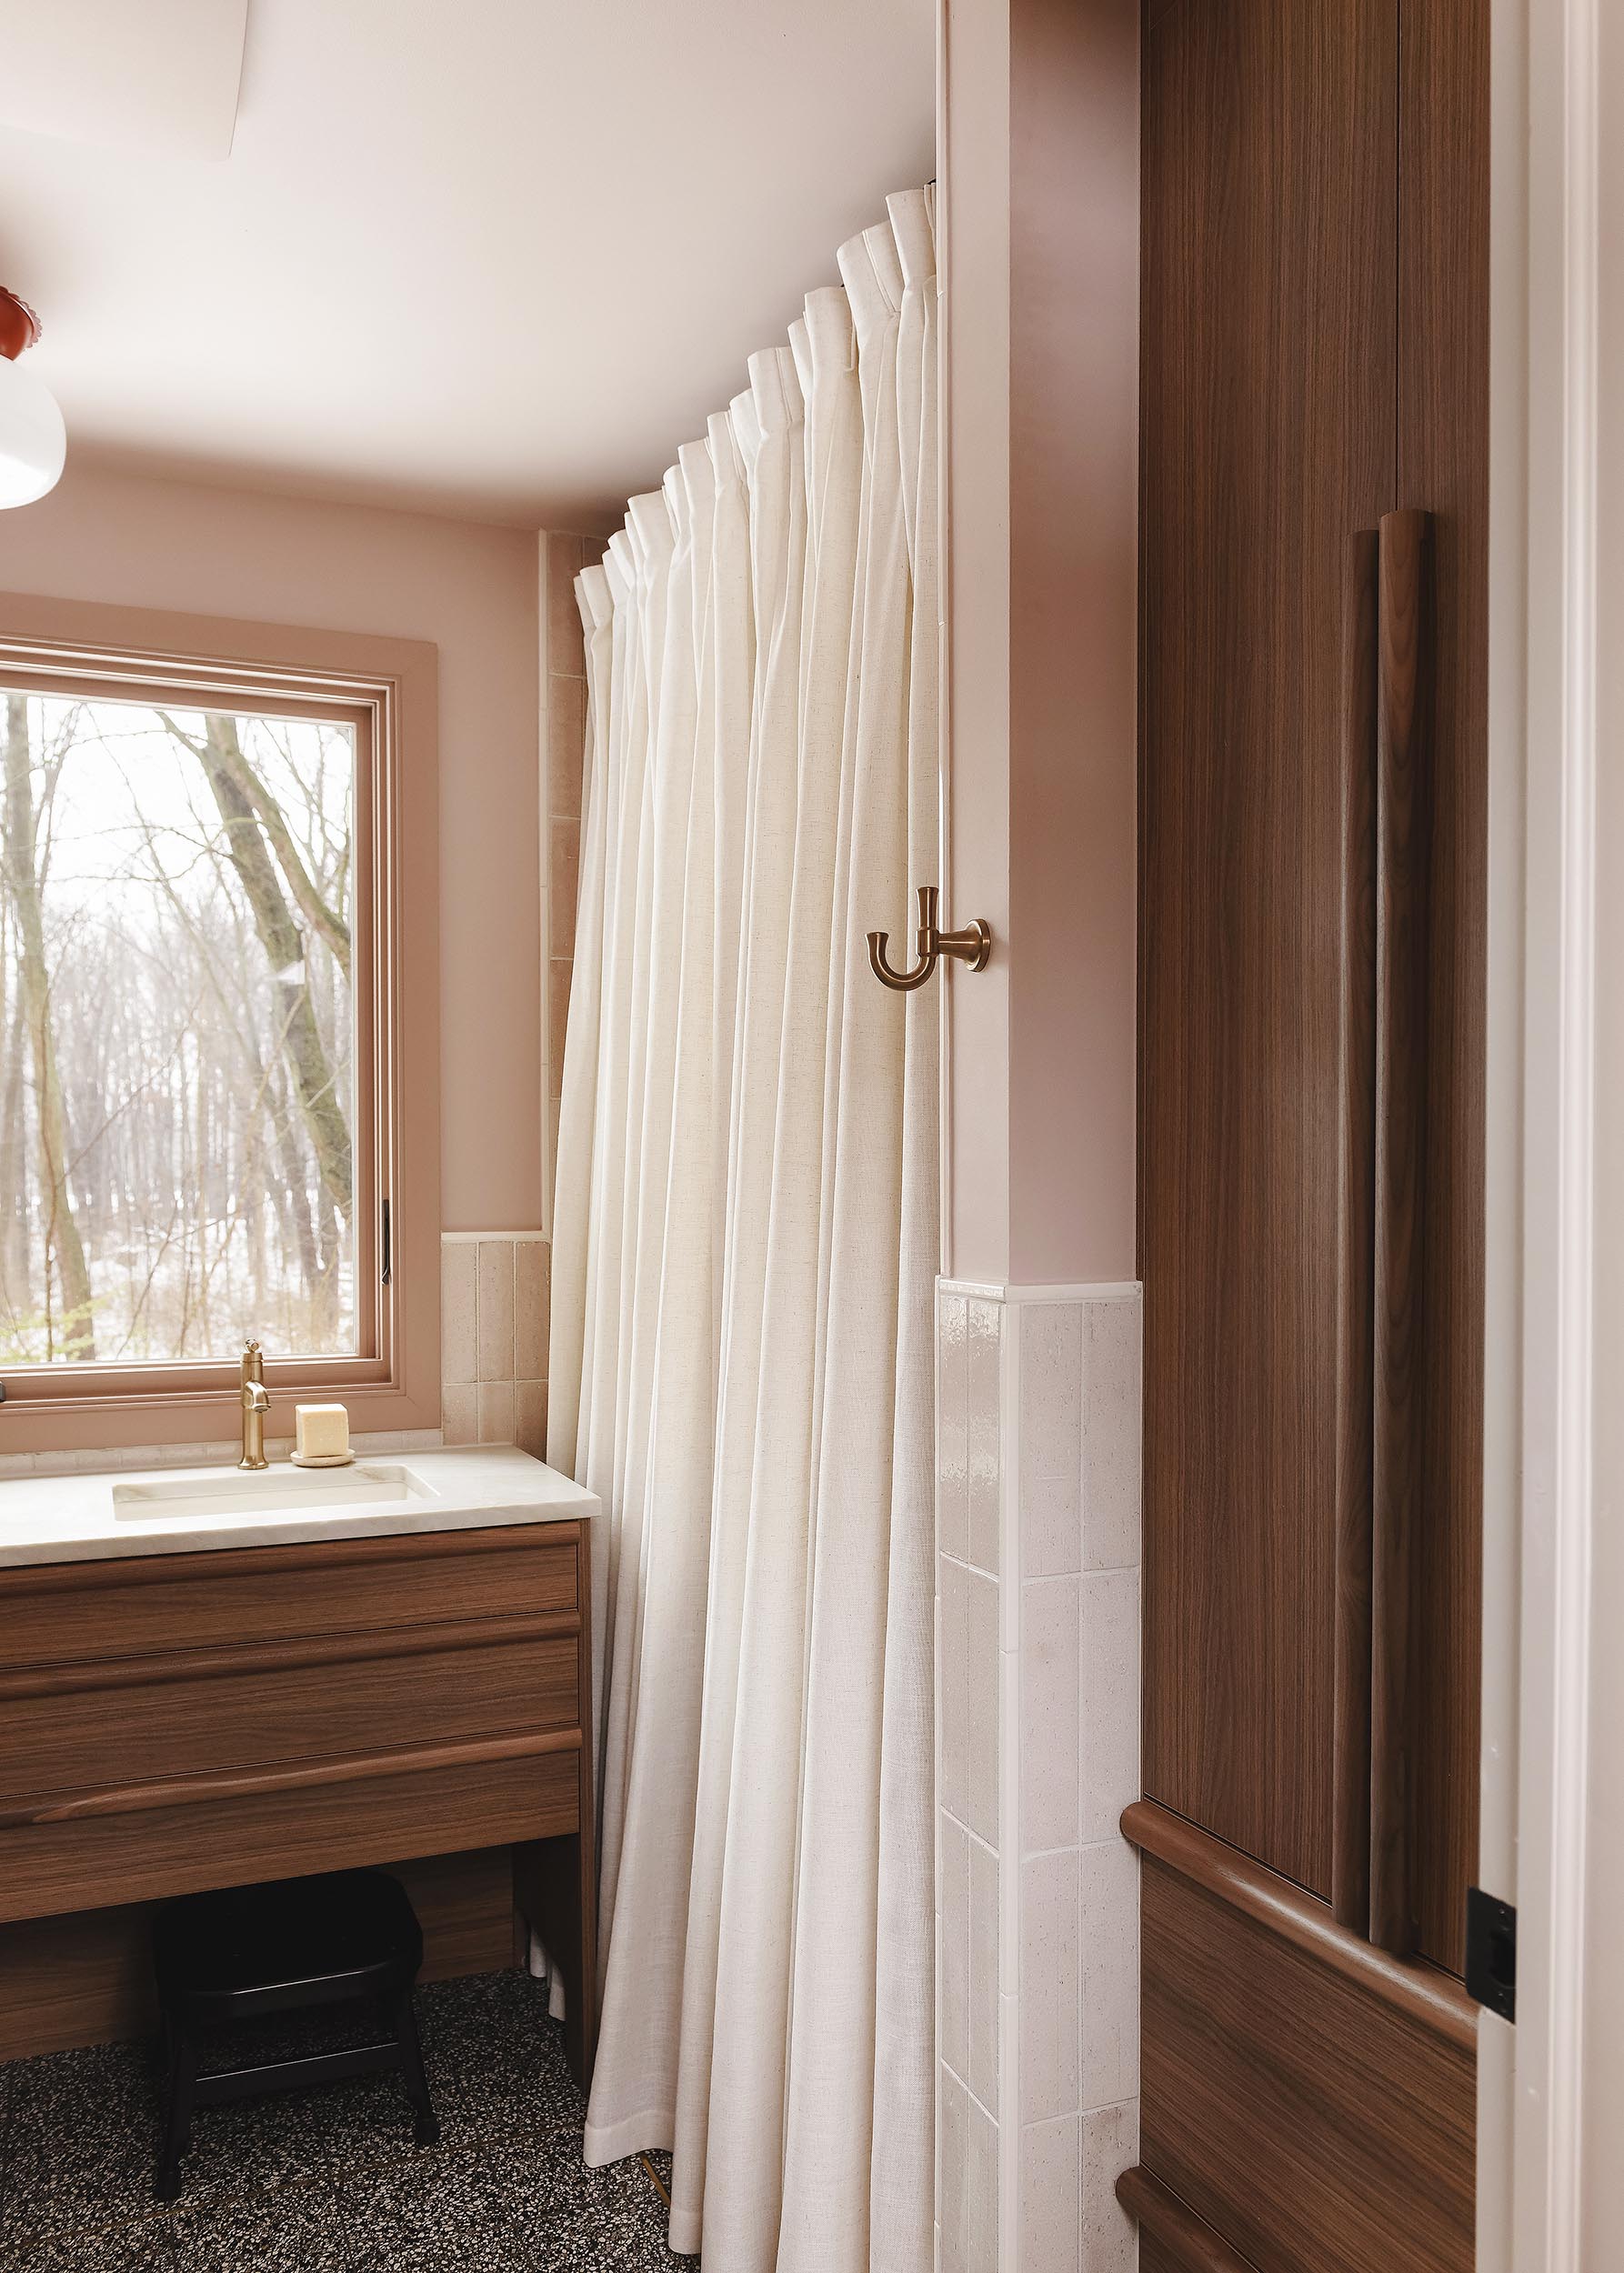 Floor to ceiling shower curtain in a pink bathroom with walnut and brass accents | via Yellow Brick Home